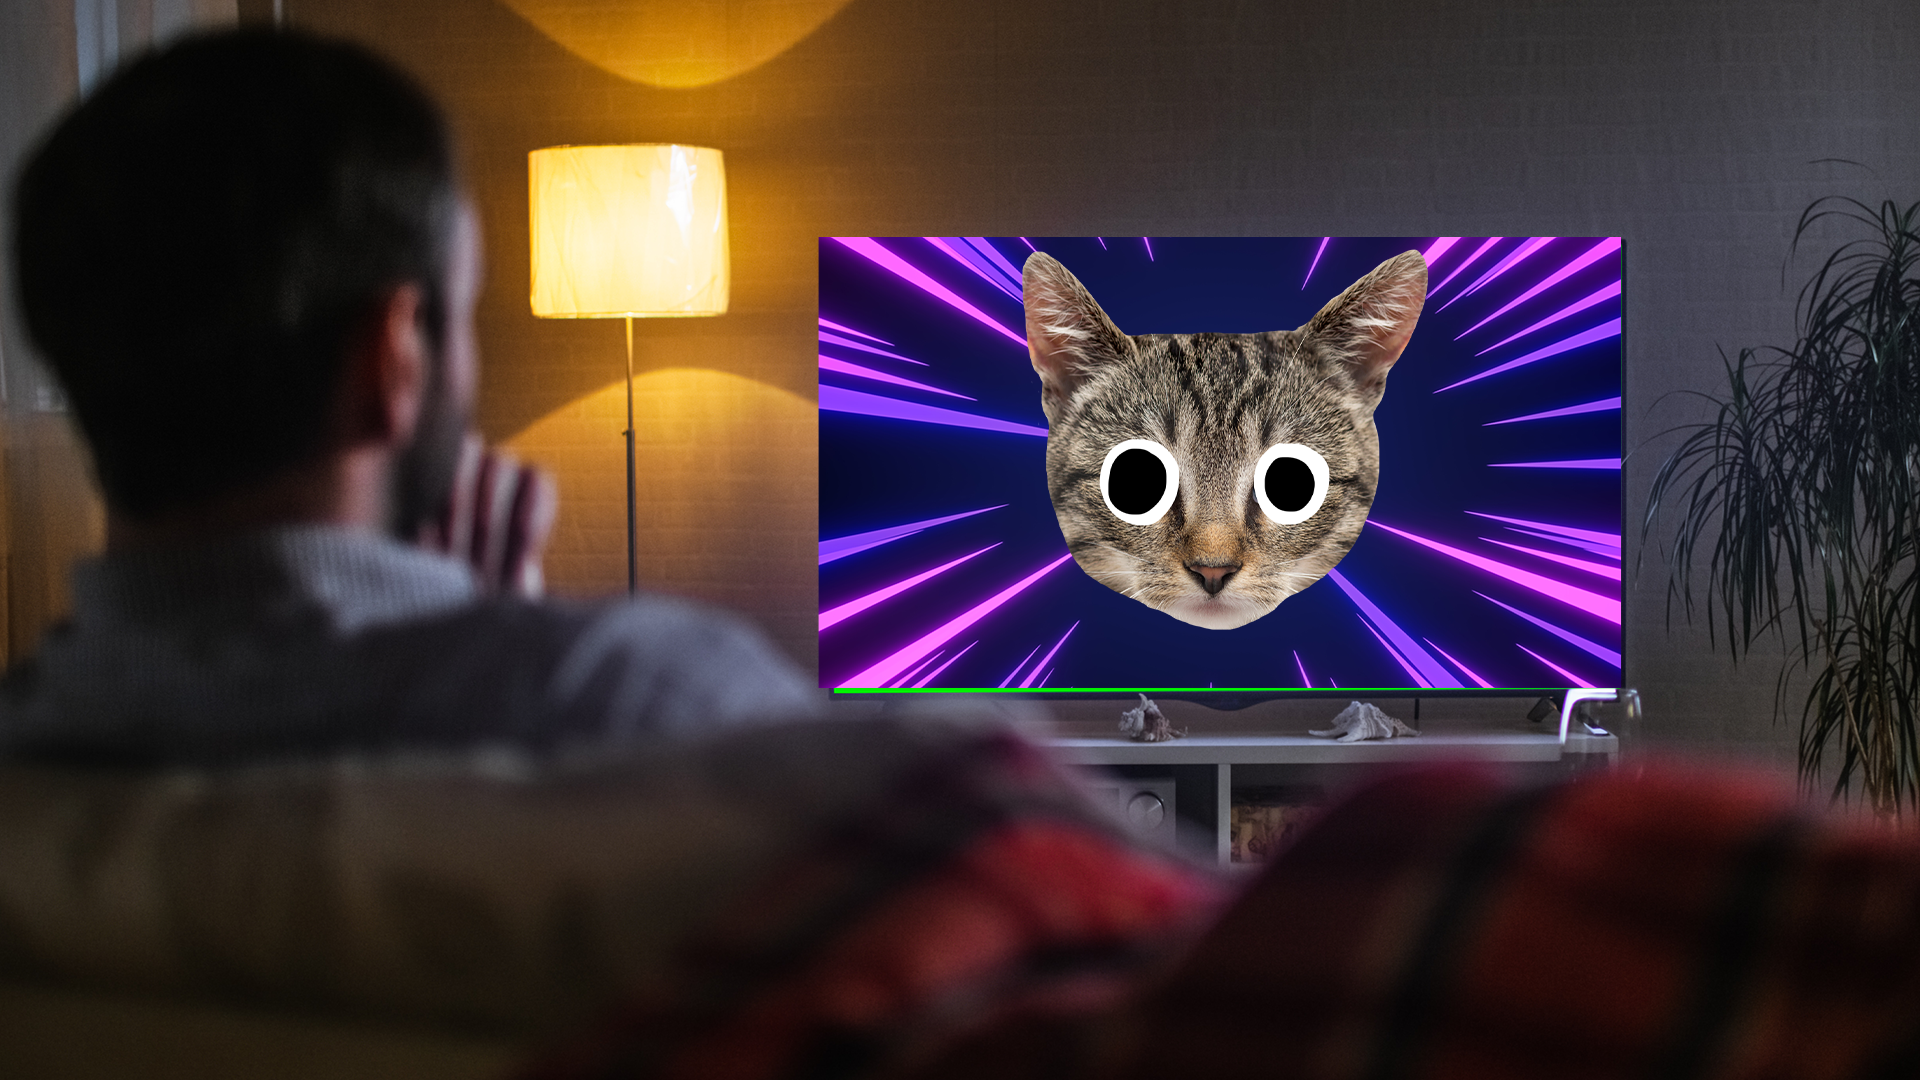 Someone watching a derpy cat on tv